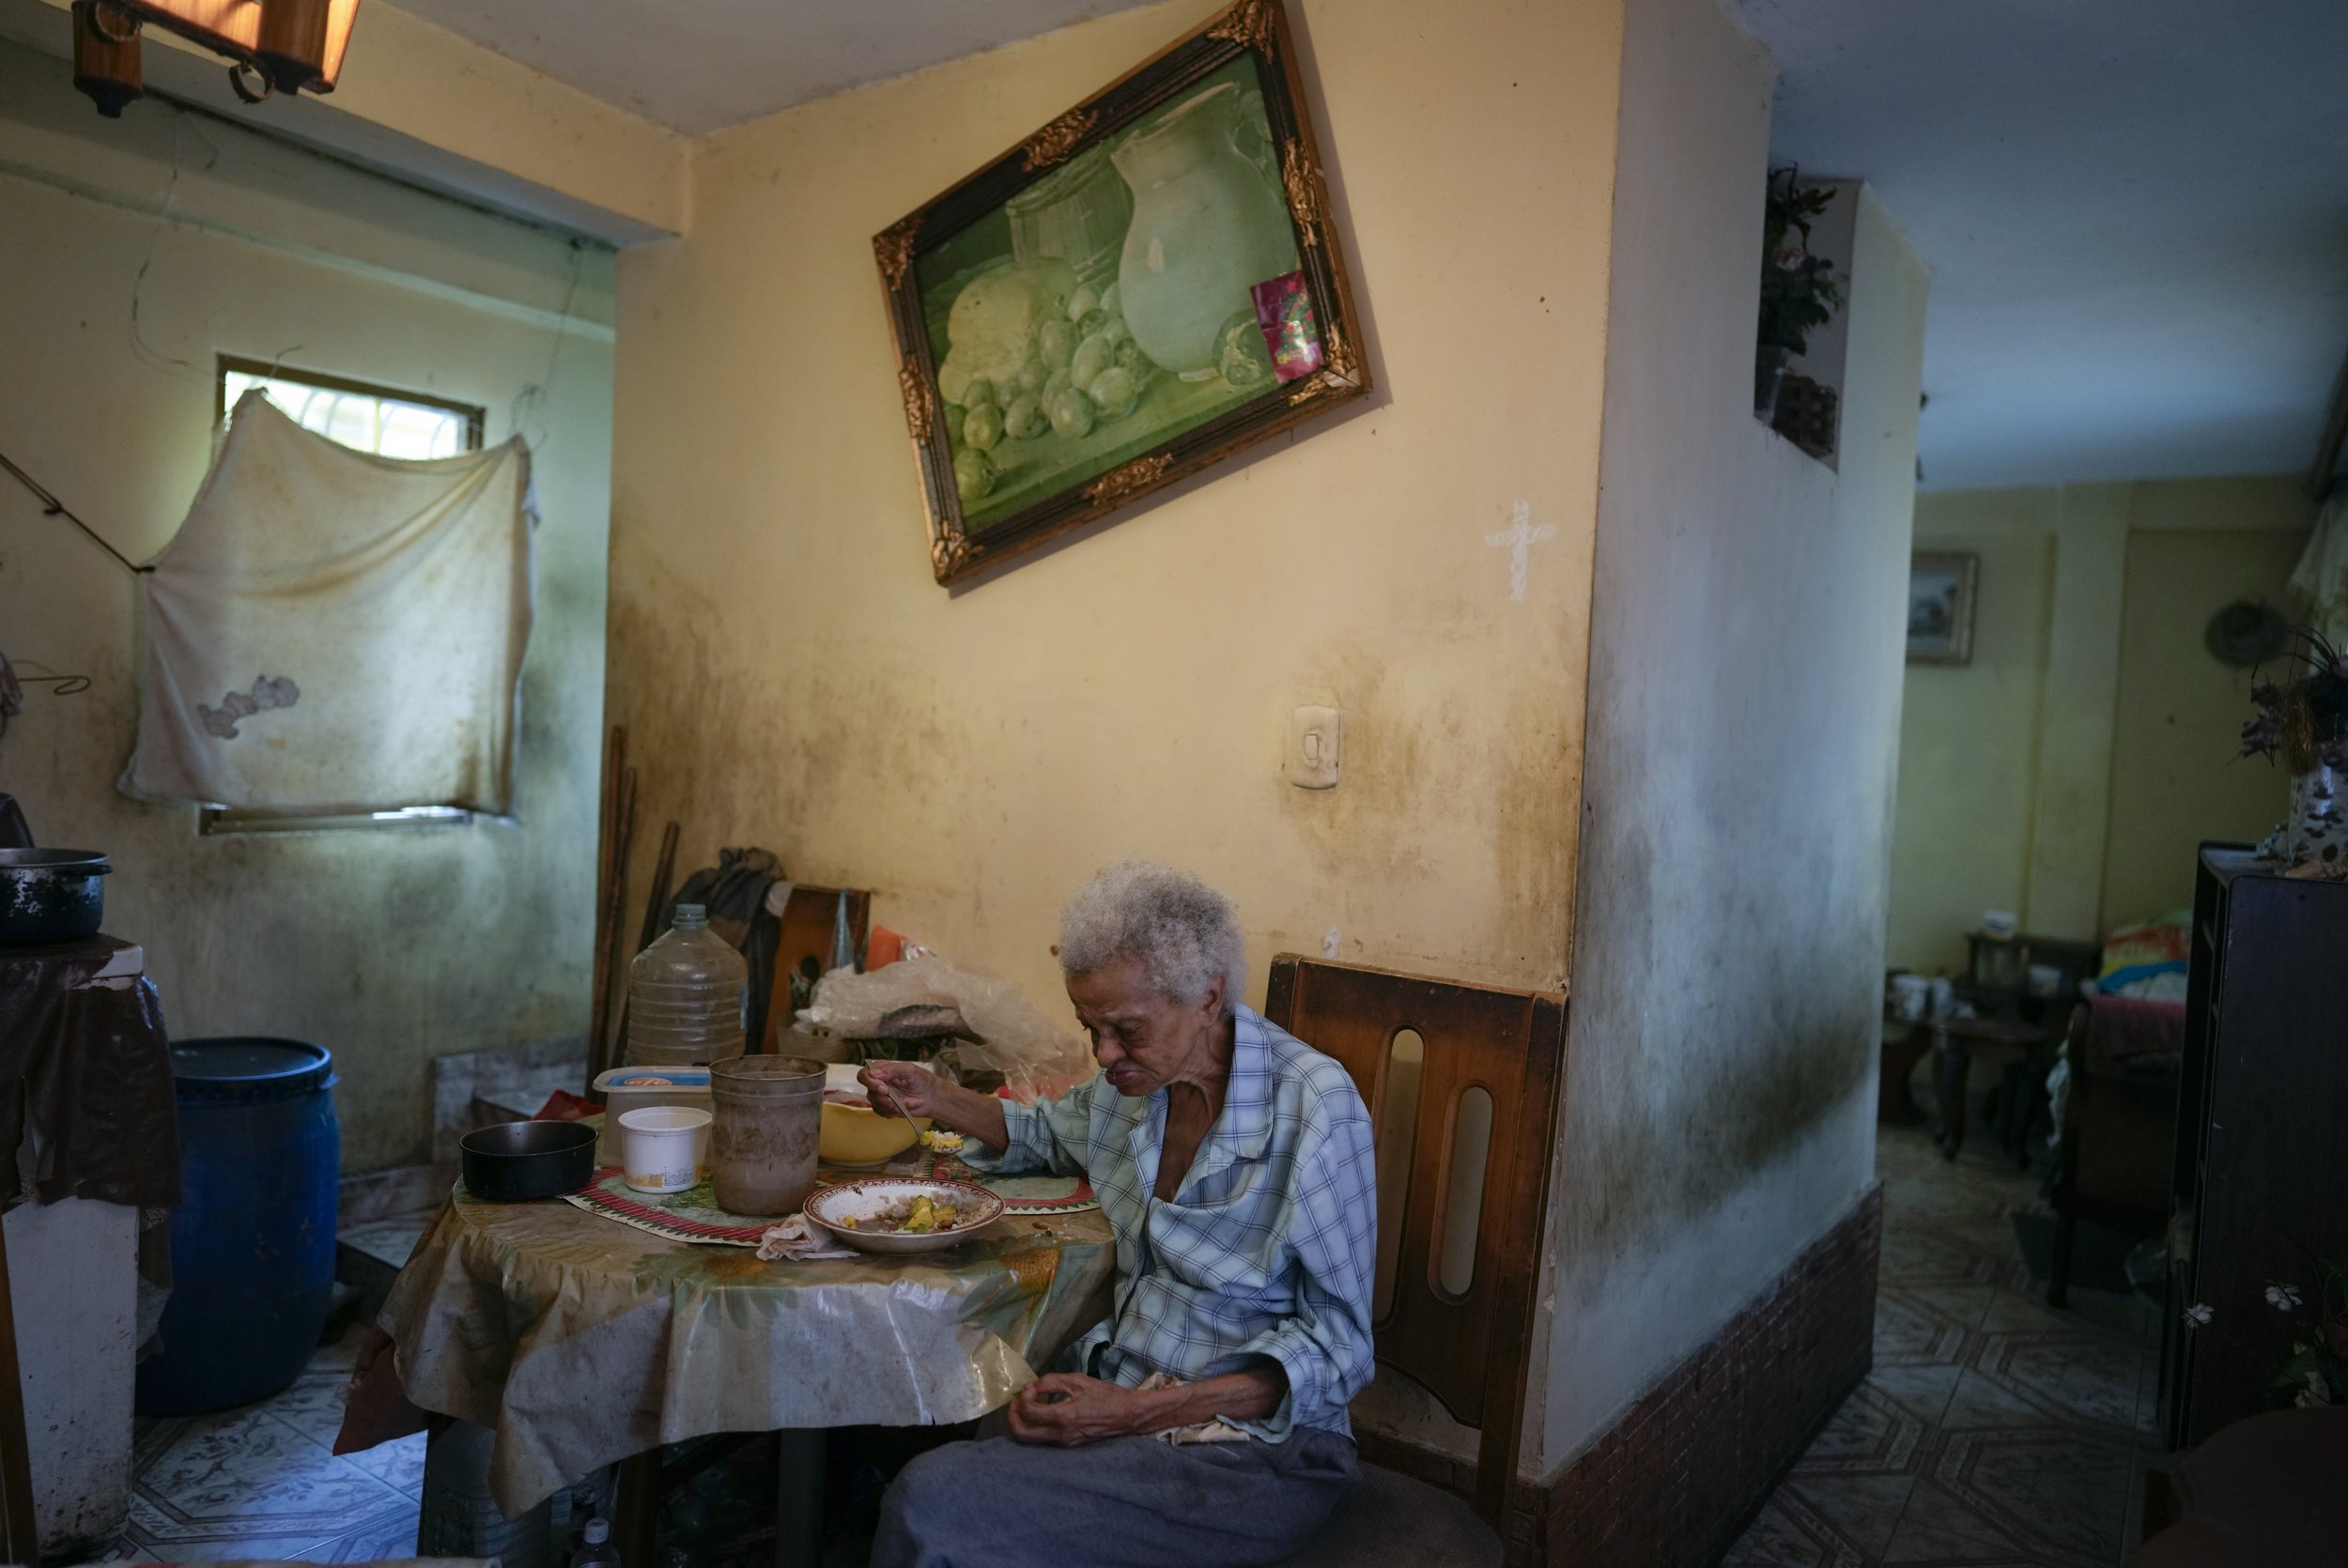  Zenobia Ansualve, 88, who lives alone, eats lunch at her home in Caracas, Venezuela, on Aug. 18, 2021. Ansualve, who does not go out because of the coronavirus pandemic, said she lives on $20 a month from renting a room and an elderly friend helps b